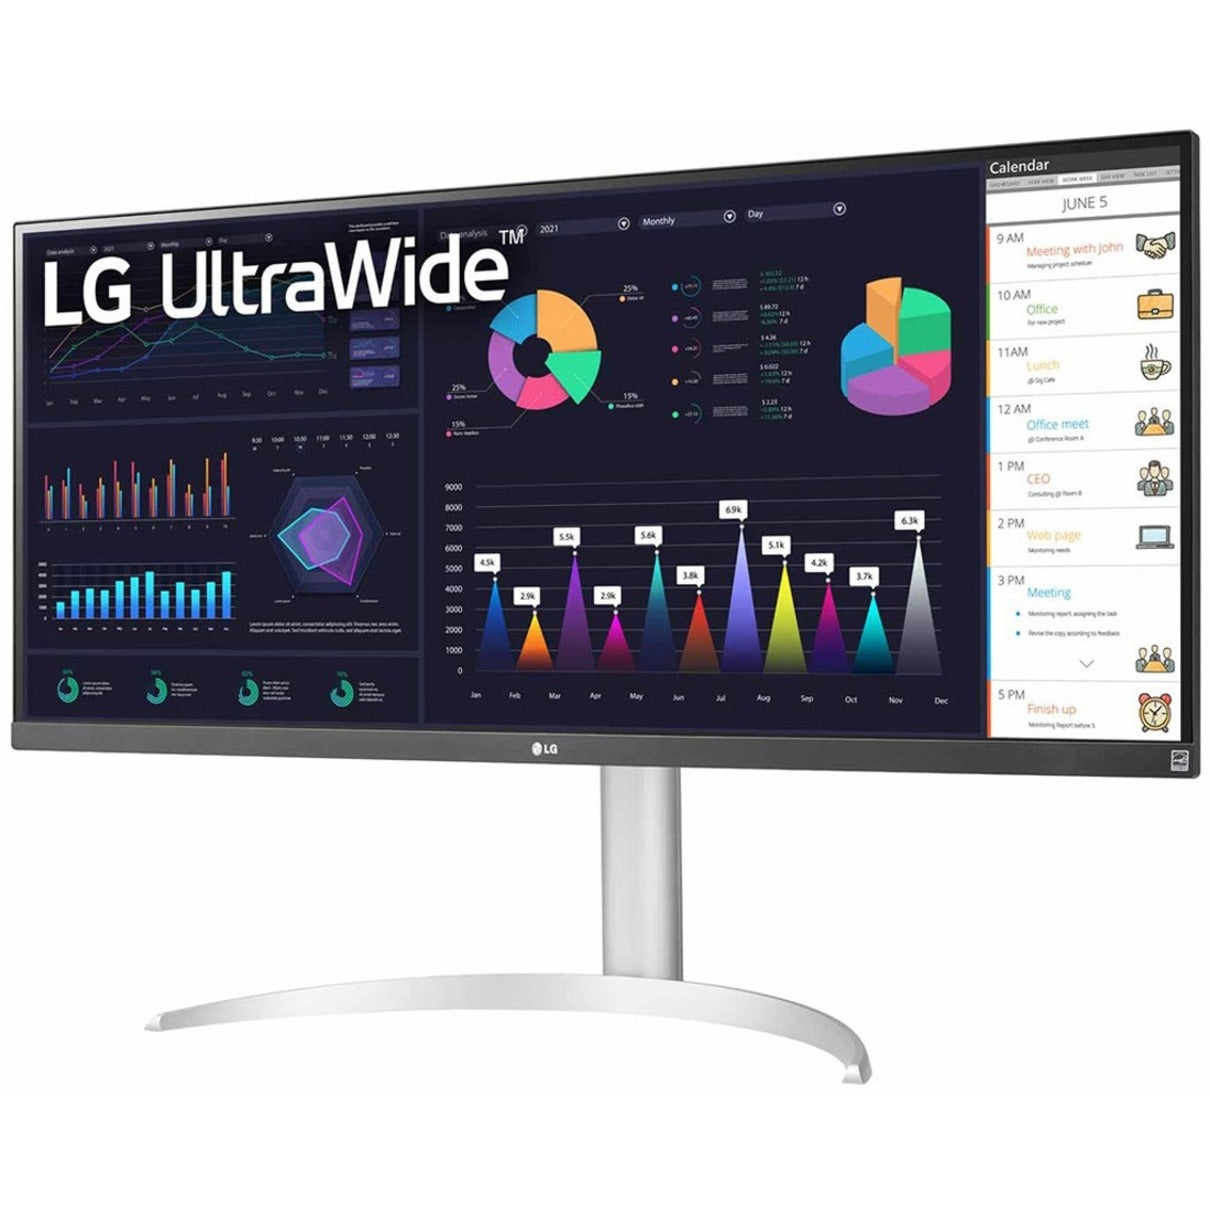 LG 34WQ650-W.AUS Ultrawide 34" LCD Monitor 100Hz IPS with HDR 400 Compatibility AMD FreeSync USB Type-C